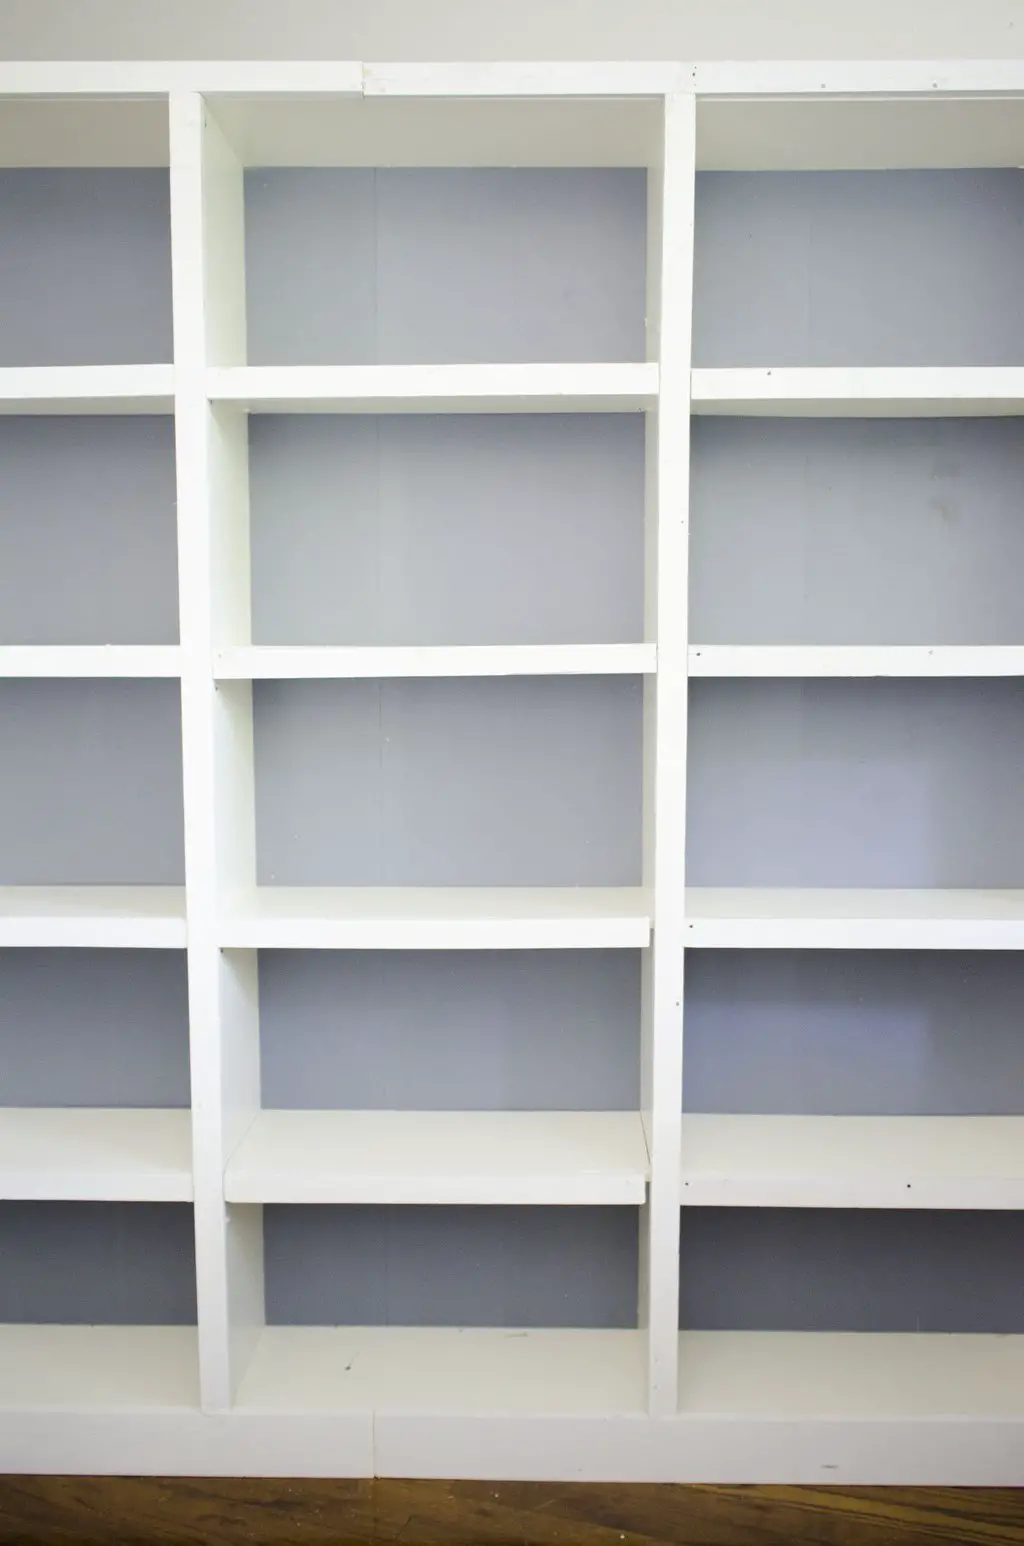 Built-in bookcases DIY Ikea hack on @thouswellblog